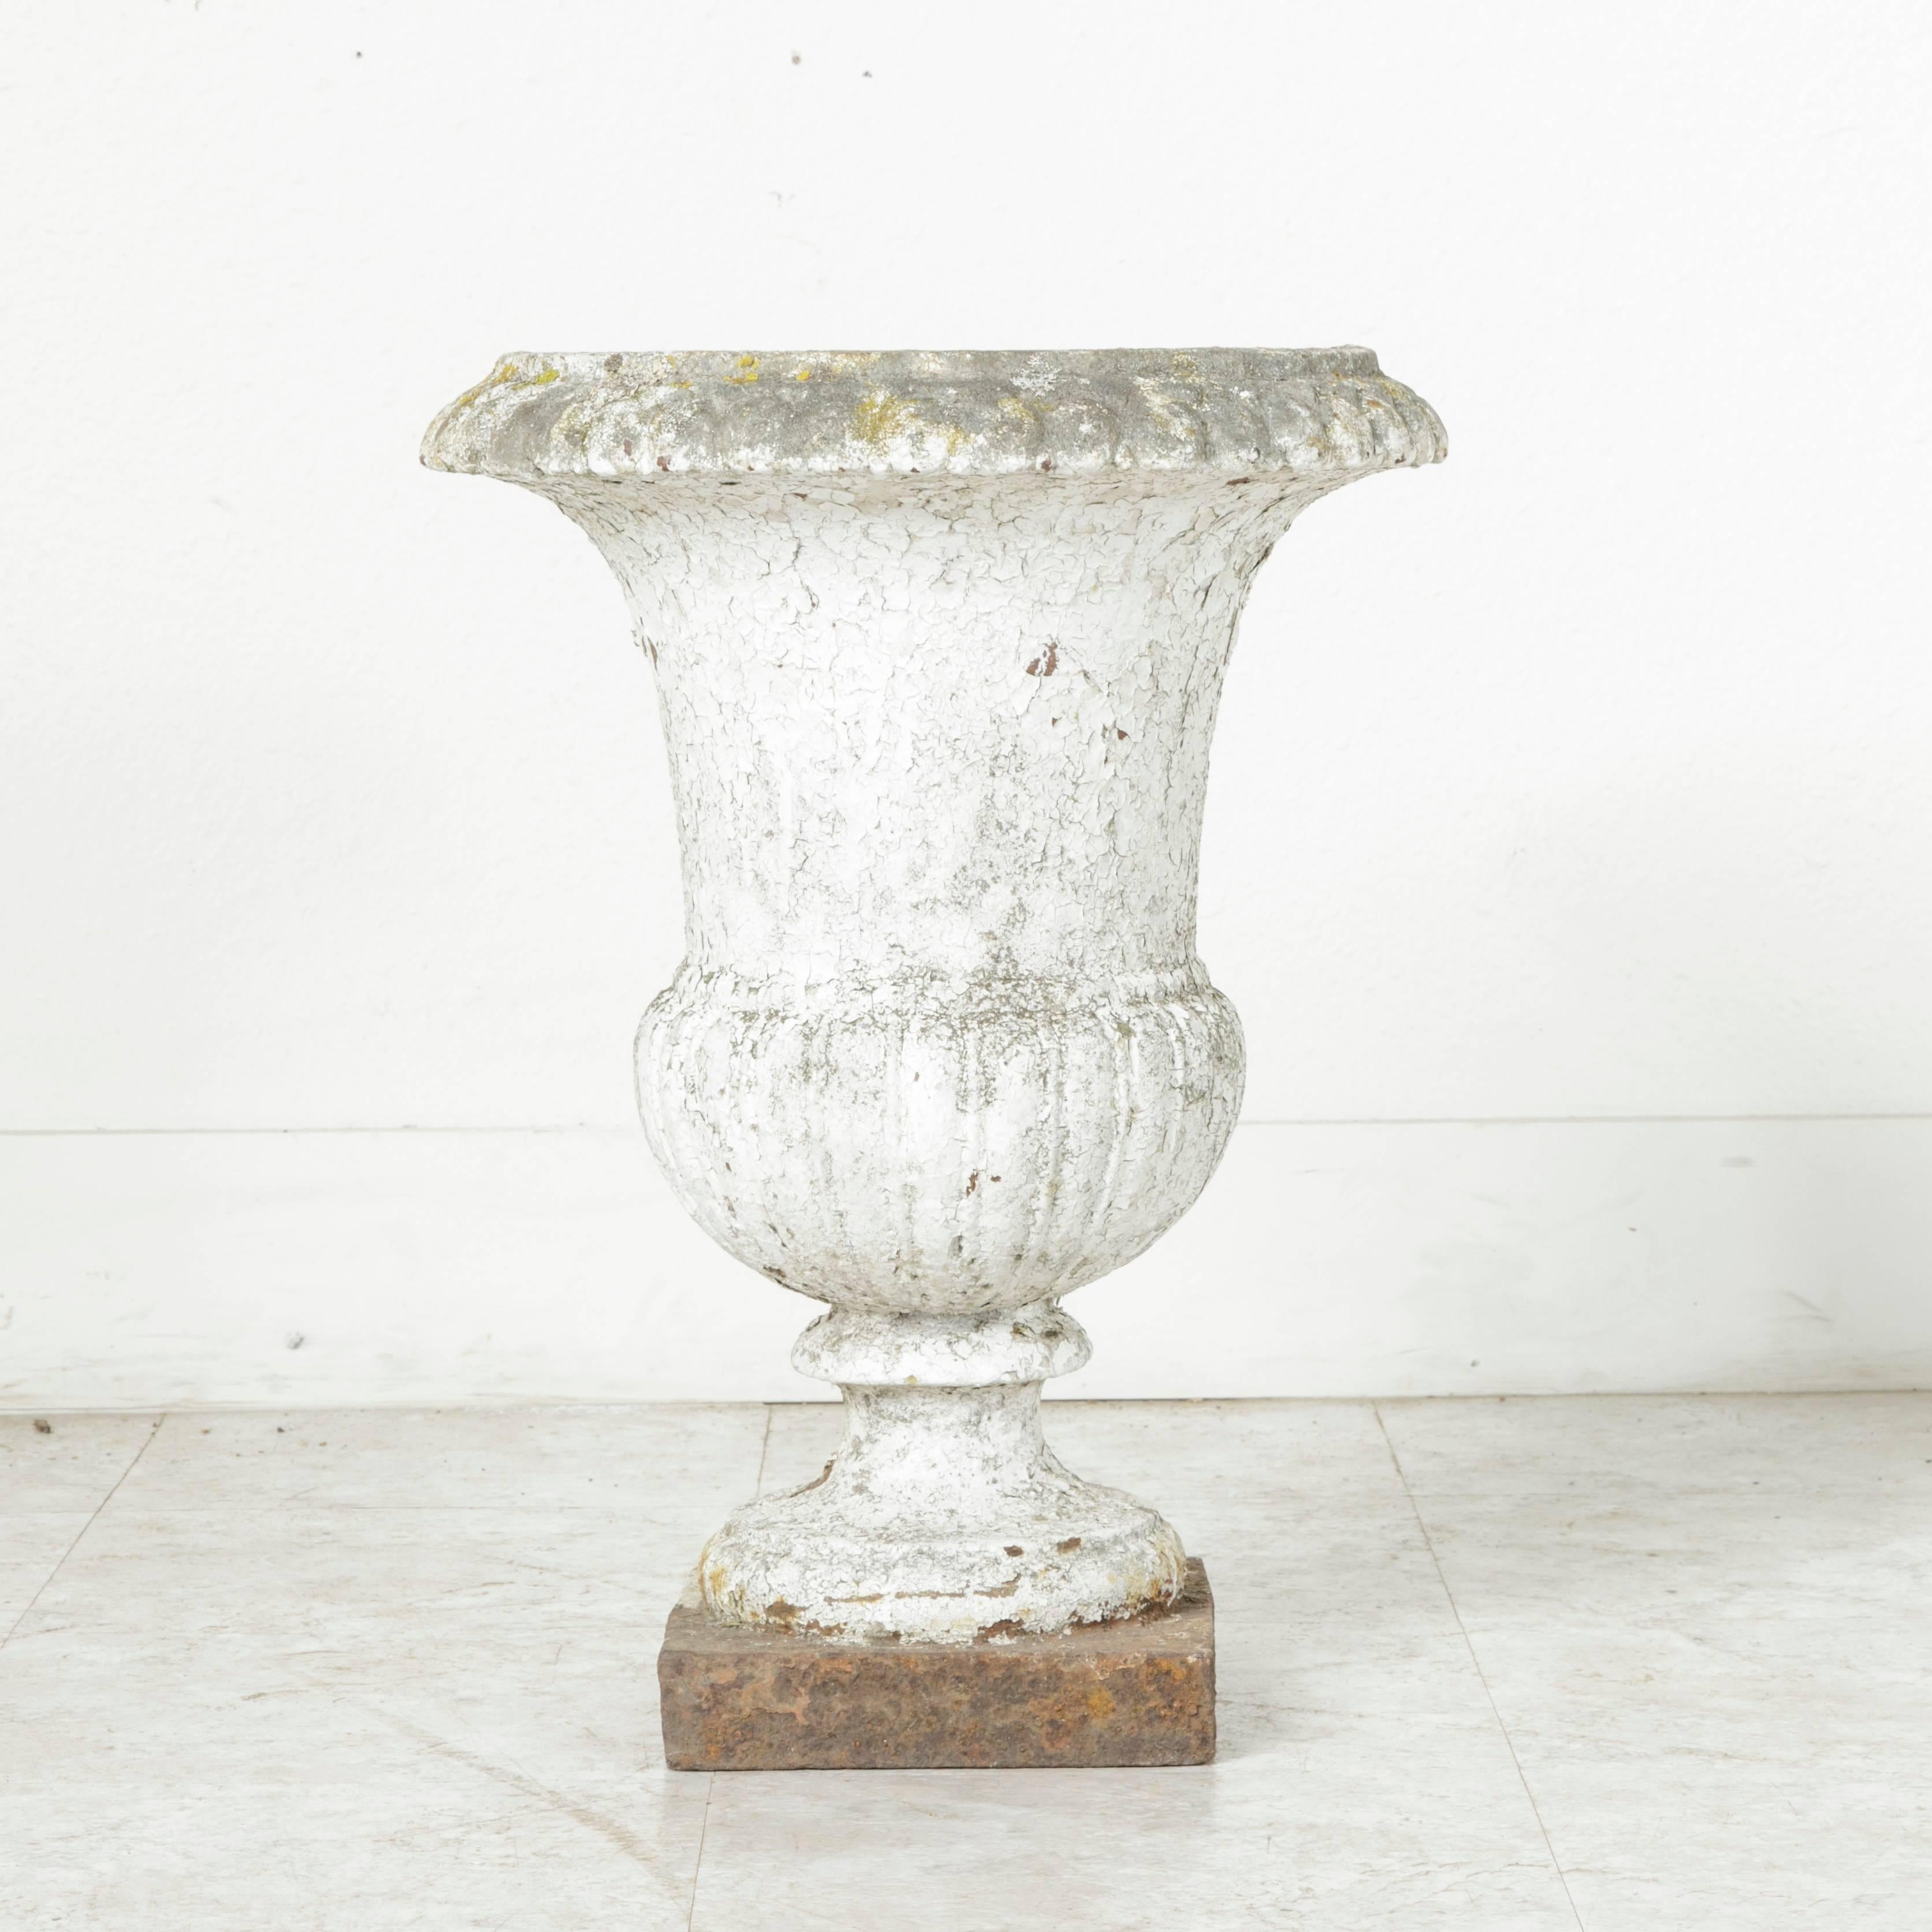 Known as a Versailles urn due to its extensive use in the renowned gardens of the Chateau de Versailles, this 18th century cast iron planter from a Normandy manor house retains its naturally aging white paint, giving it a fabulous look. A Classic